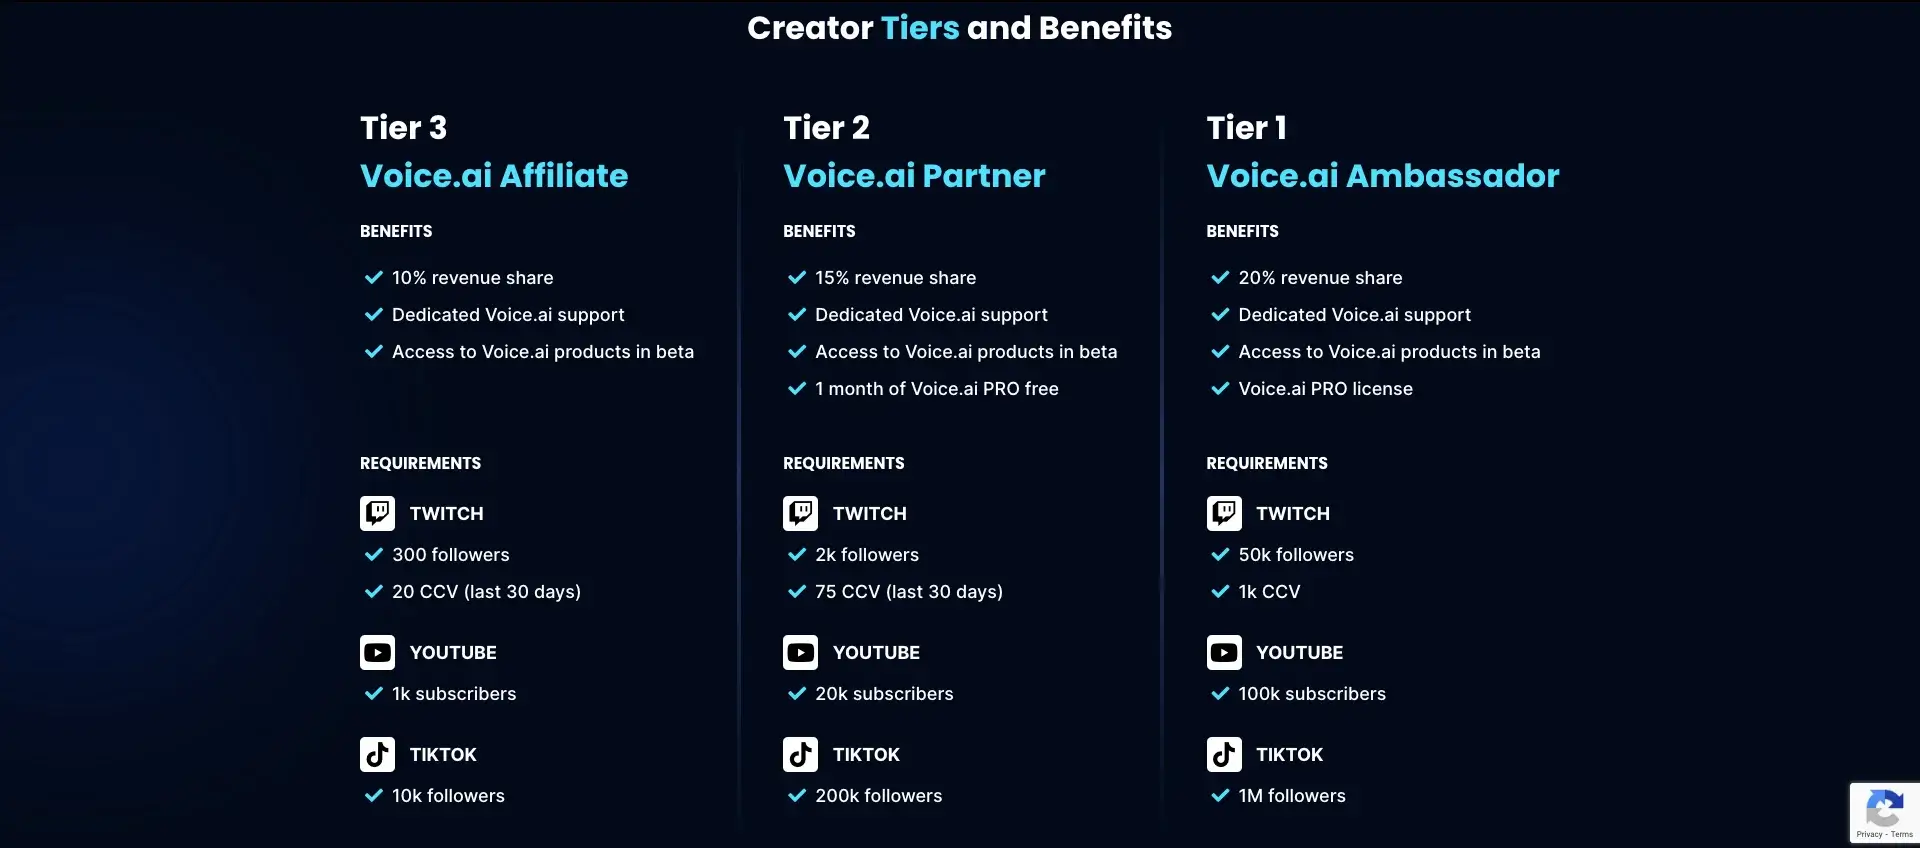 Creator Tiers and Benefits - Voice Ai